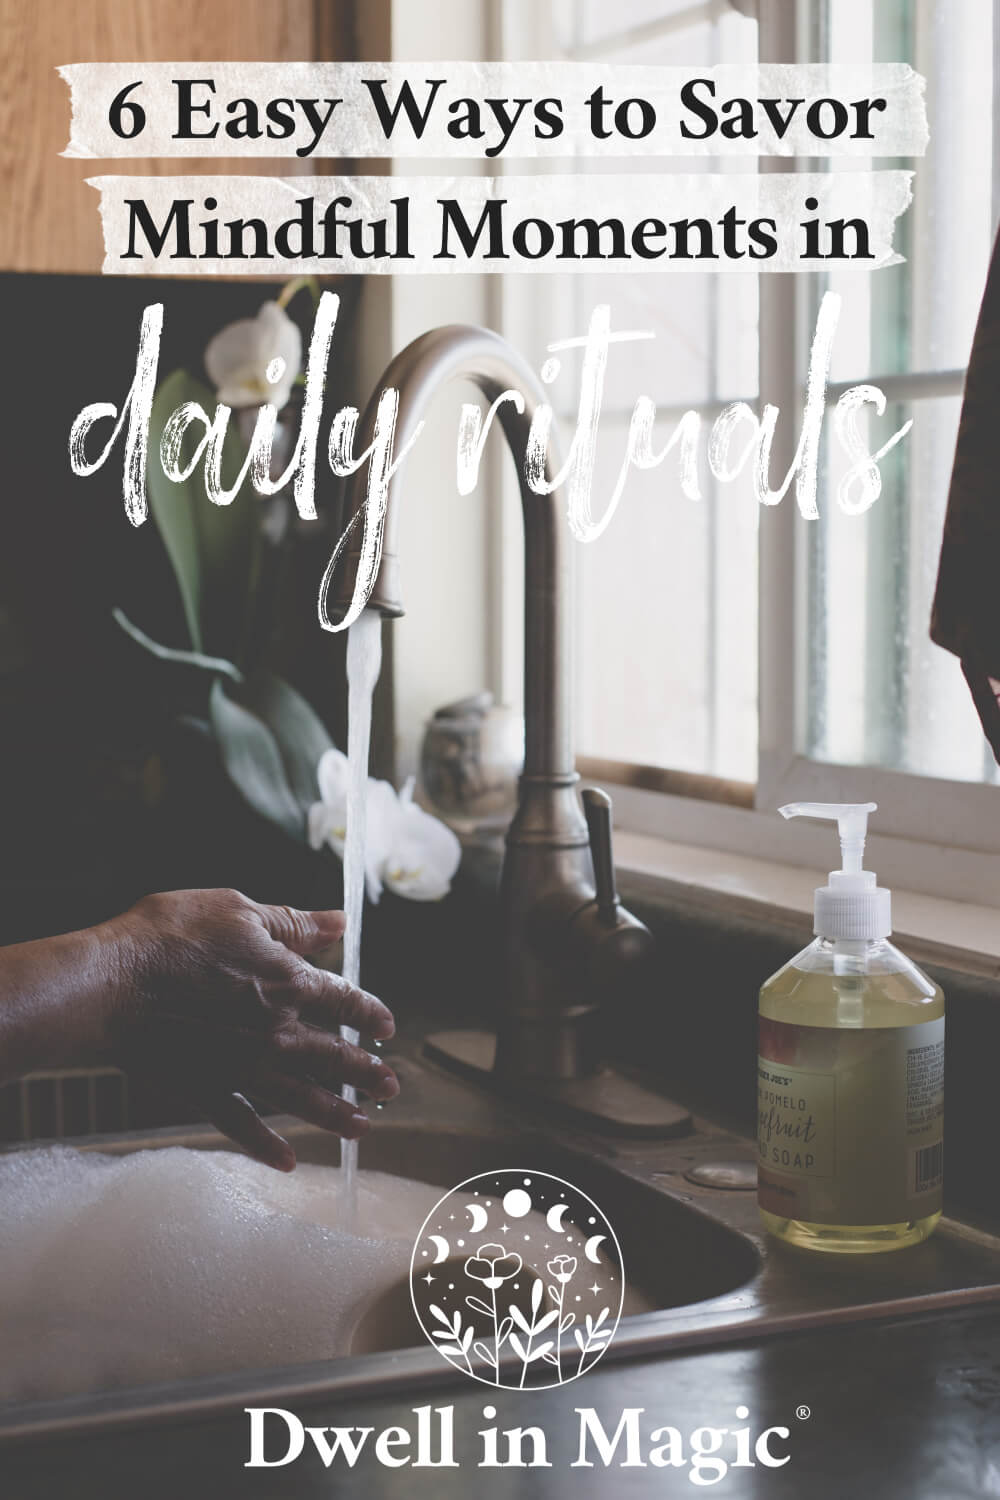 Our daily rituals and routines, such as washing dishes, are the perfect opportunities for practicing mindful moments, where we get present without our stories and attachments. This is one of the easiest ways to feel more grounded, present, and at ease.